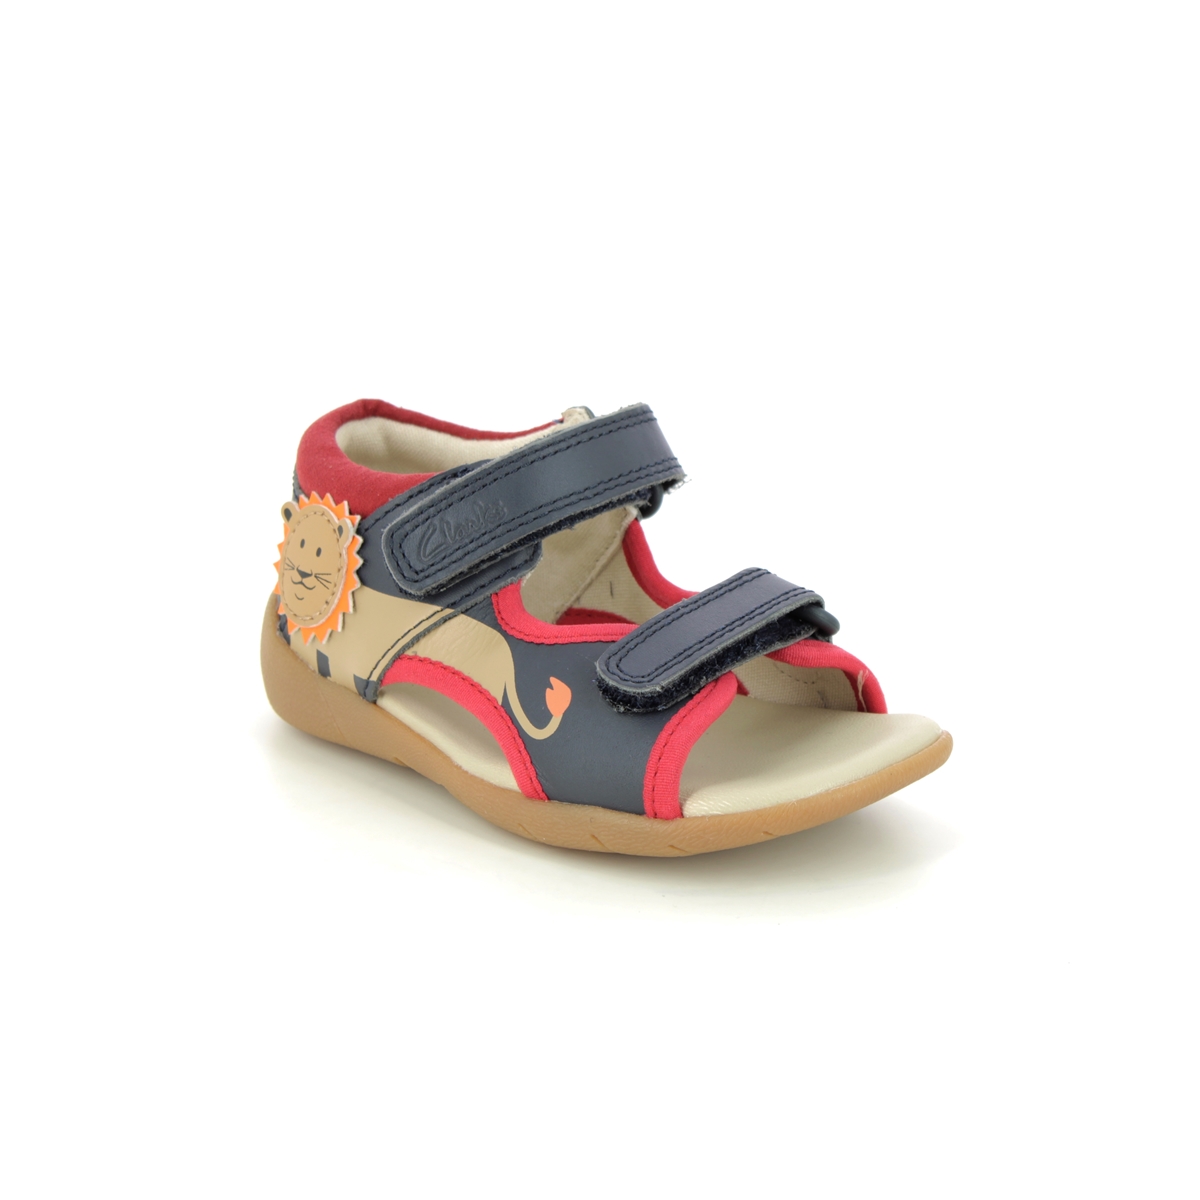 Clarks Zora Jungle T Navy Leather Kids Boys Sandals 646216F In Size 5 In Plain Navy Leather F Width Fitting Regular Fit For kids